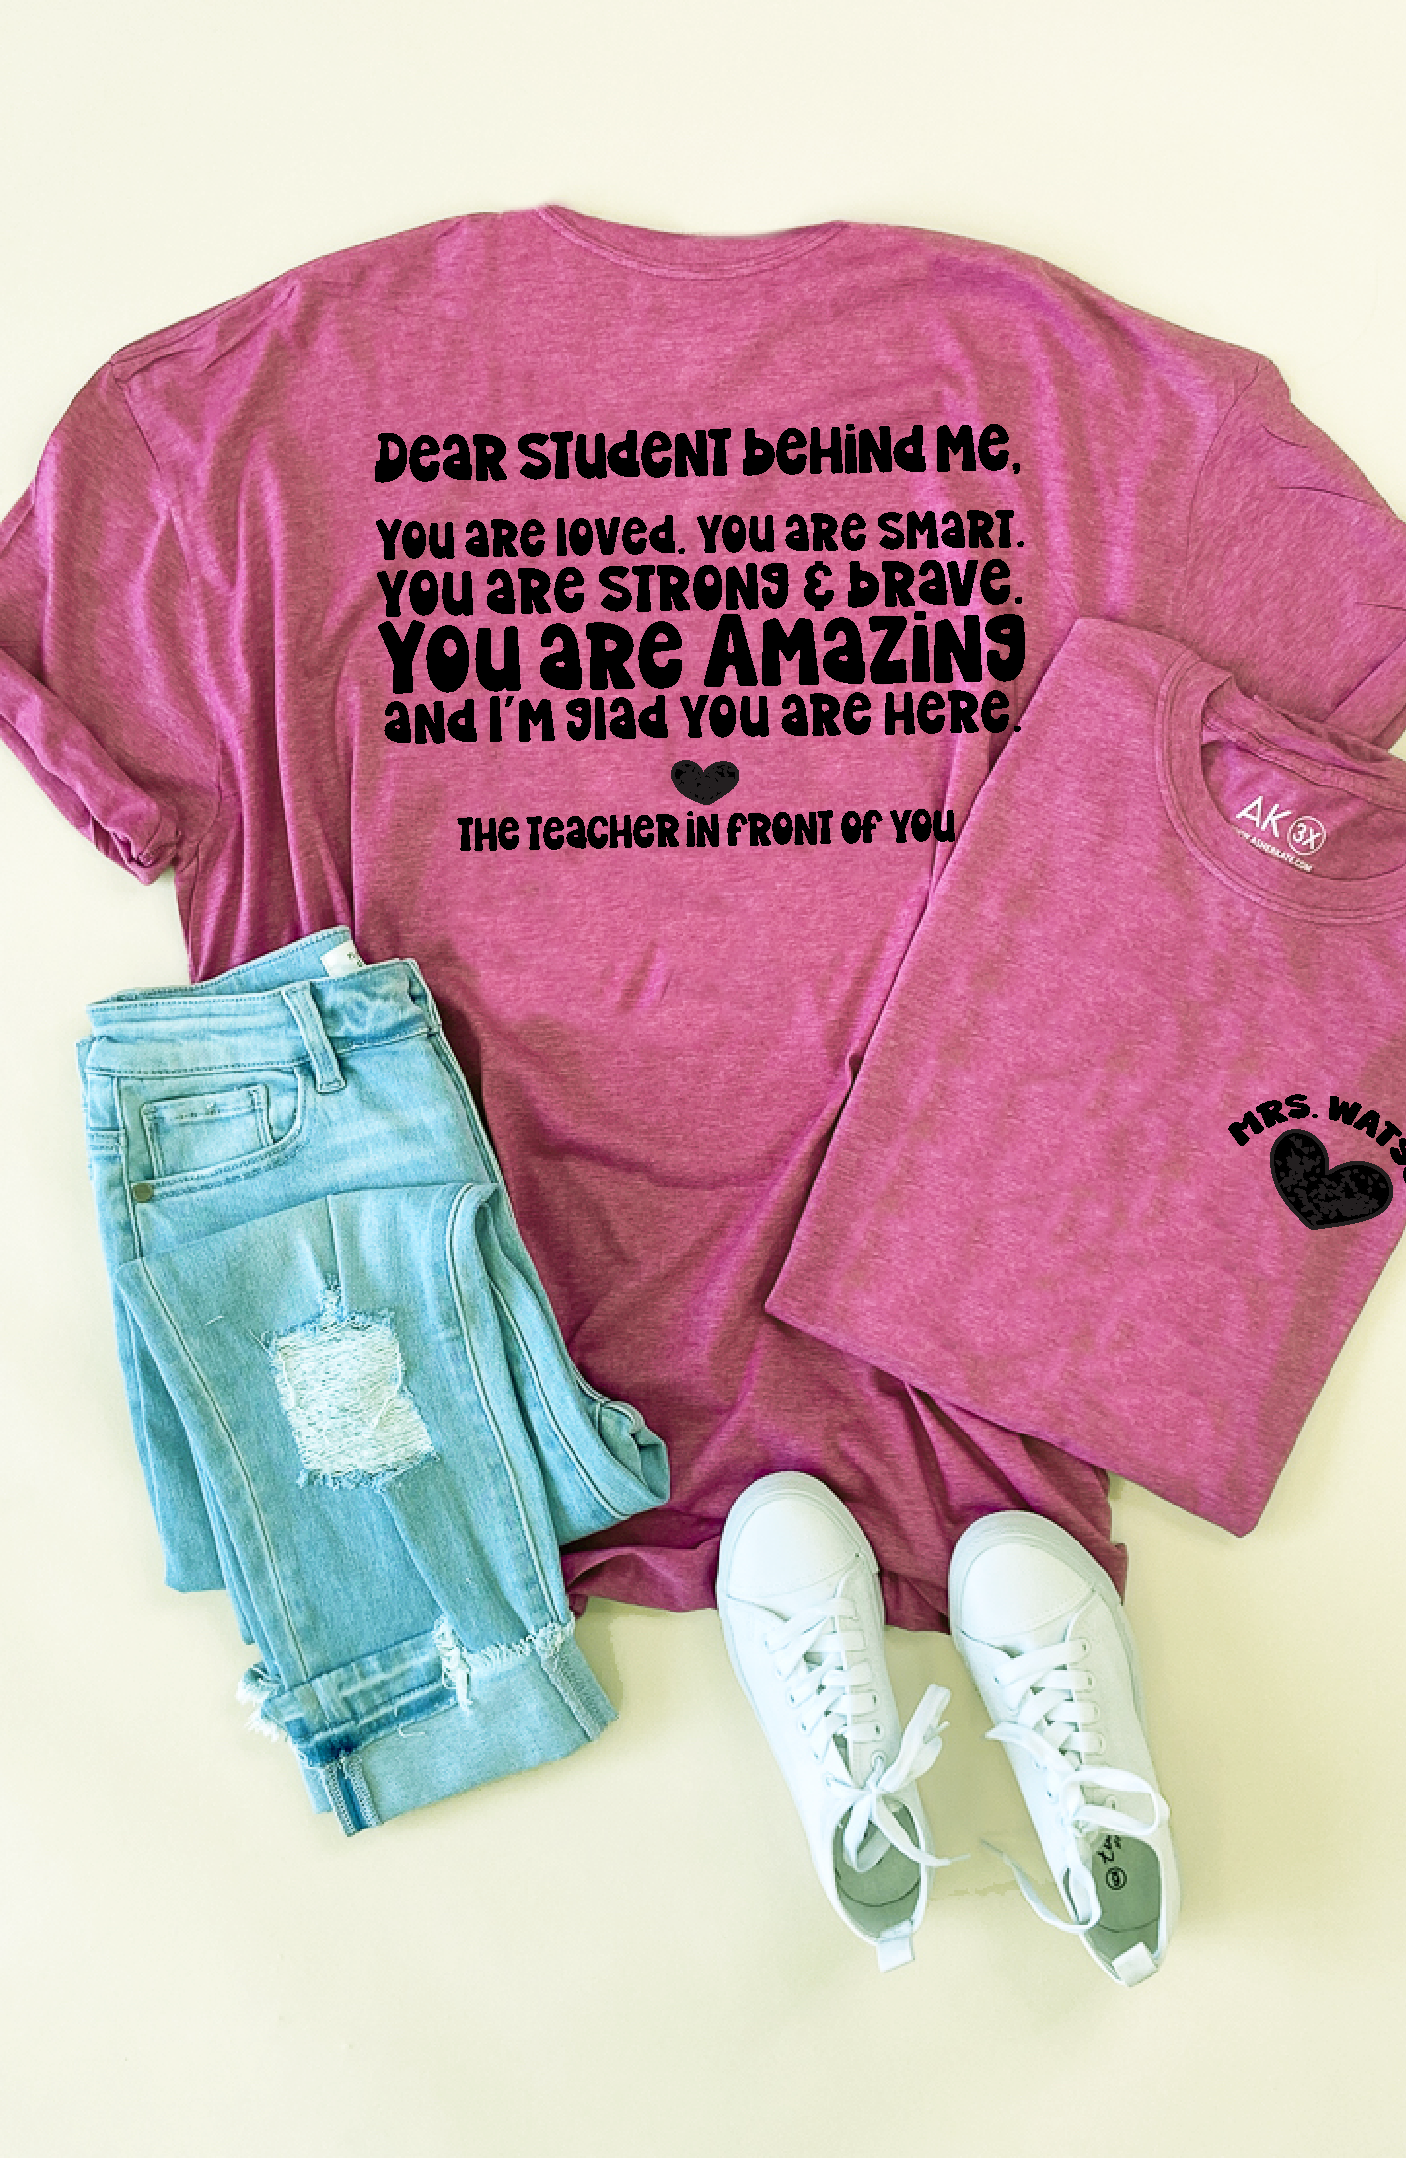 Behind Me Tee - You are Amazing